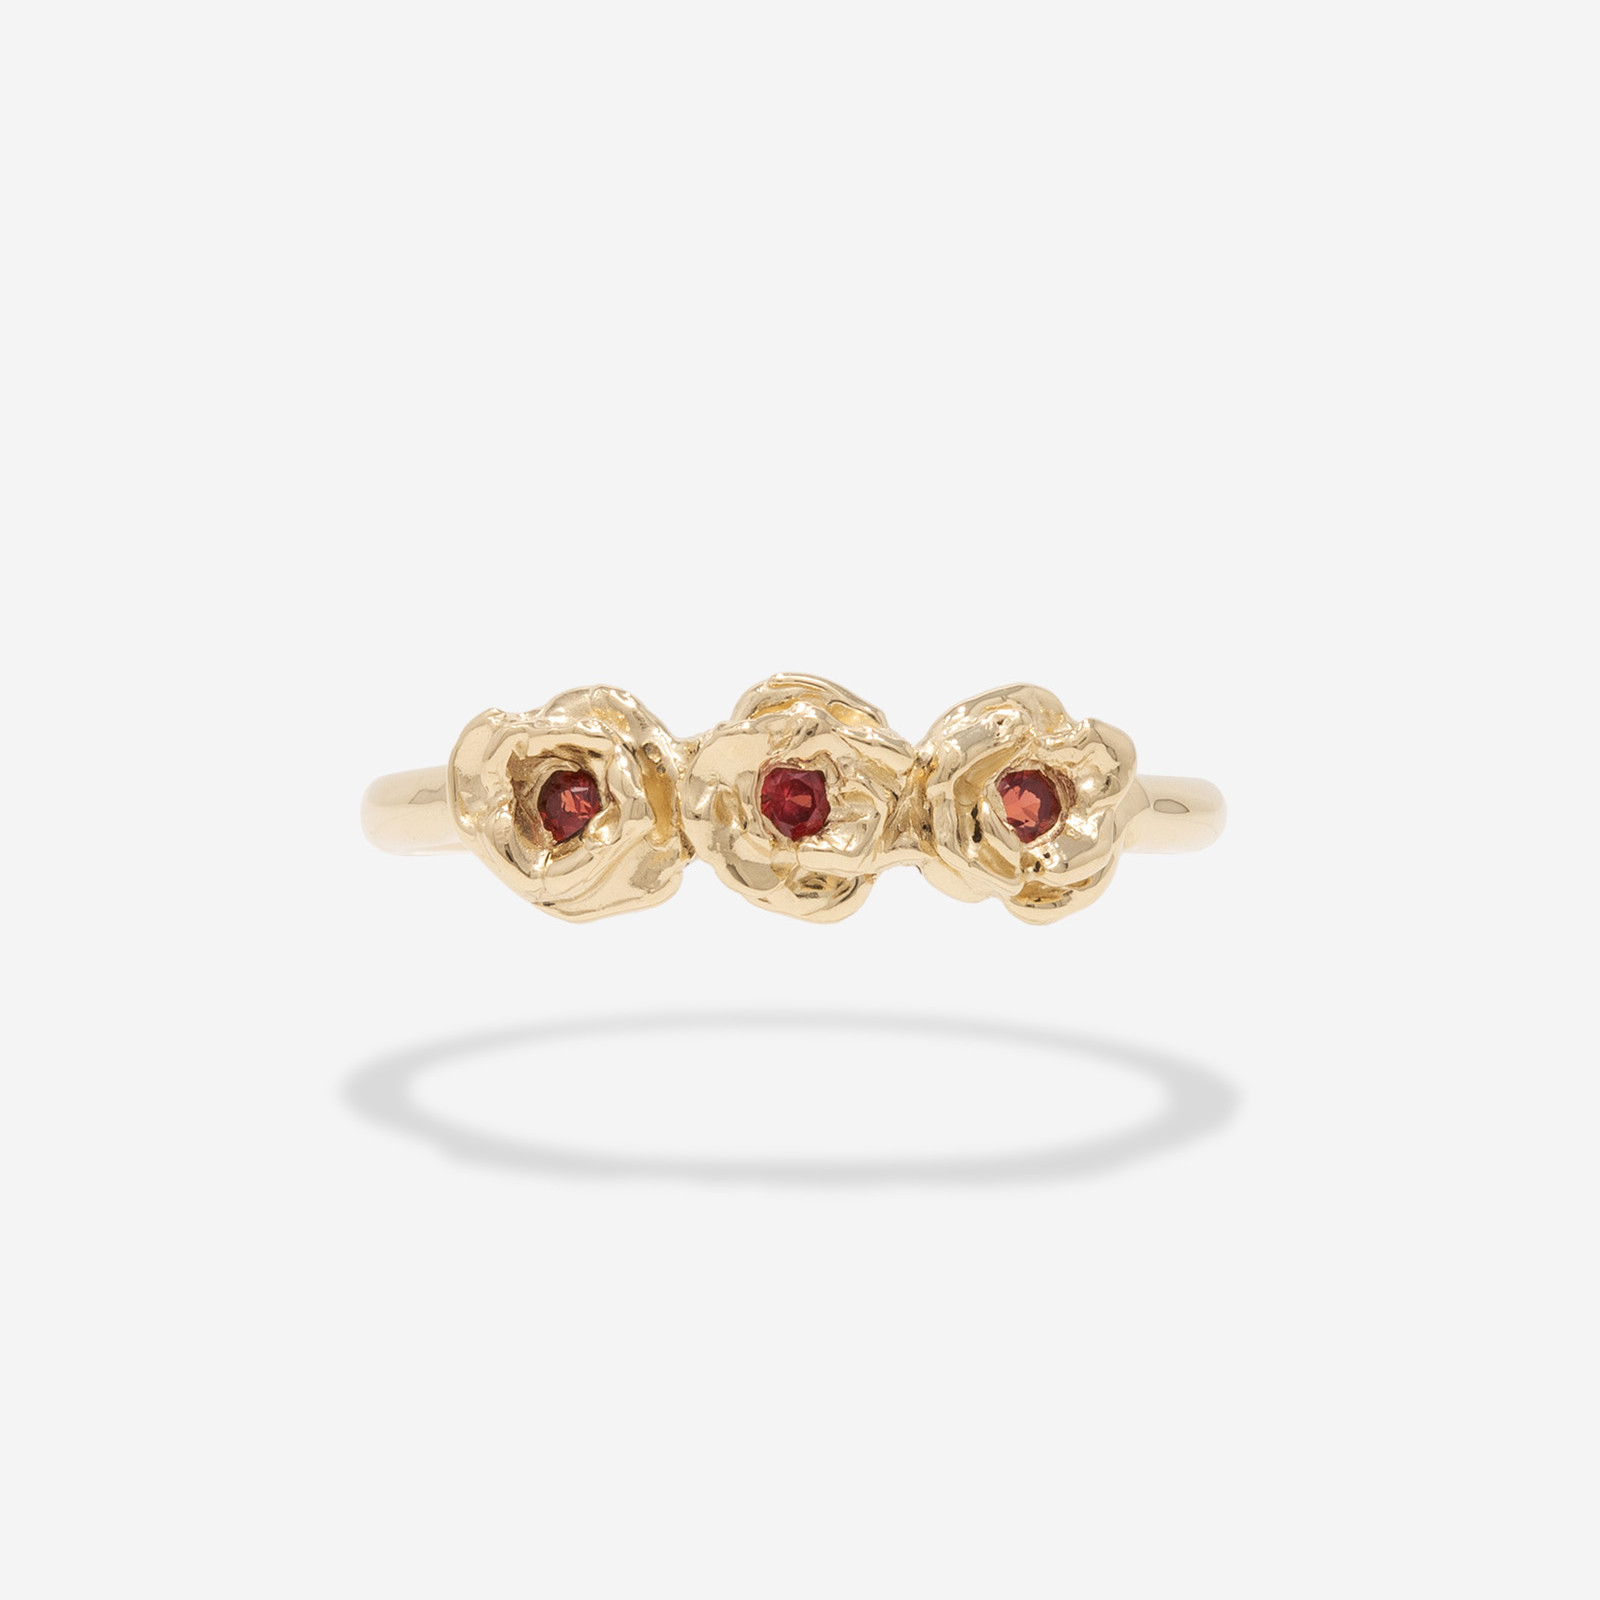 Three rose ring with red sapphire centers.